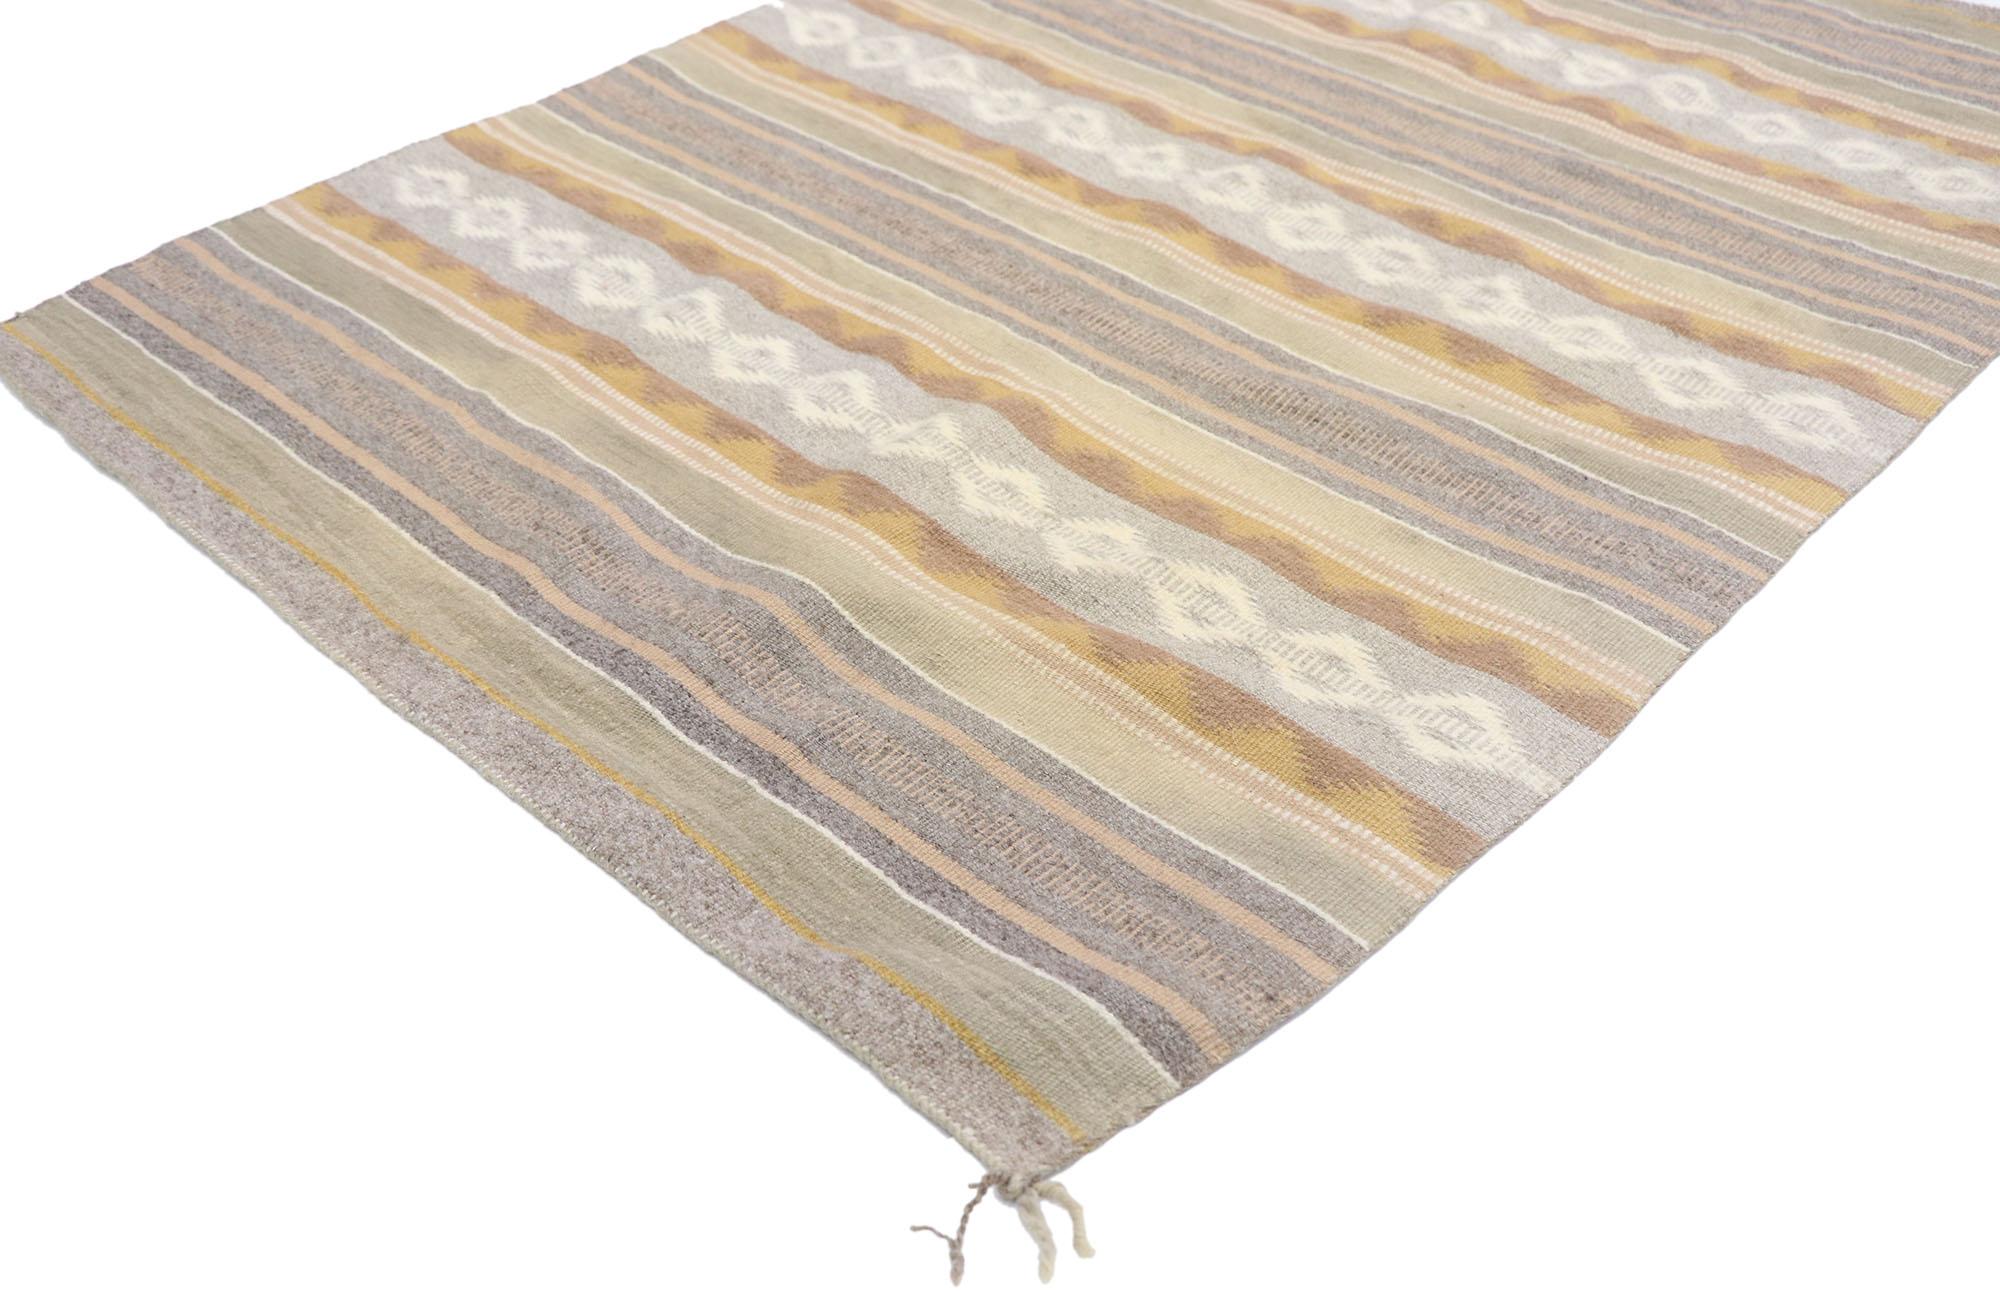 77868 vintage Navajo Kilim rug with Southwestern Bohemian Tribal style 02'10 x 04'00. Full of history with woven tales and effortless beauty, this hand woven wool vintage Navajo kilim rug beautifully embodies a southwestern bohemian tribal style.